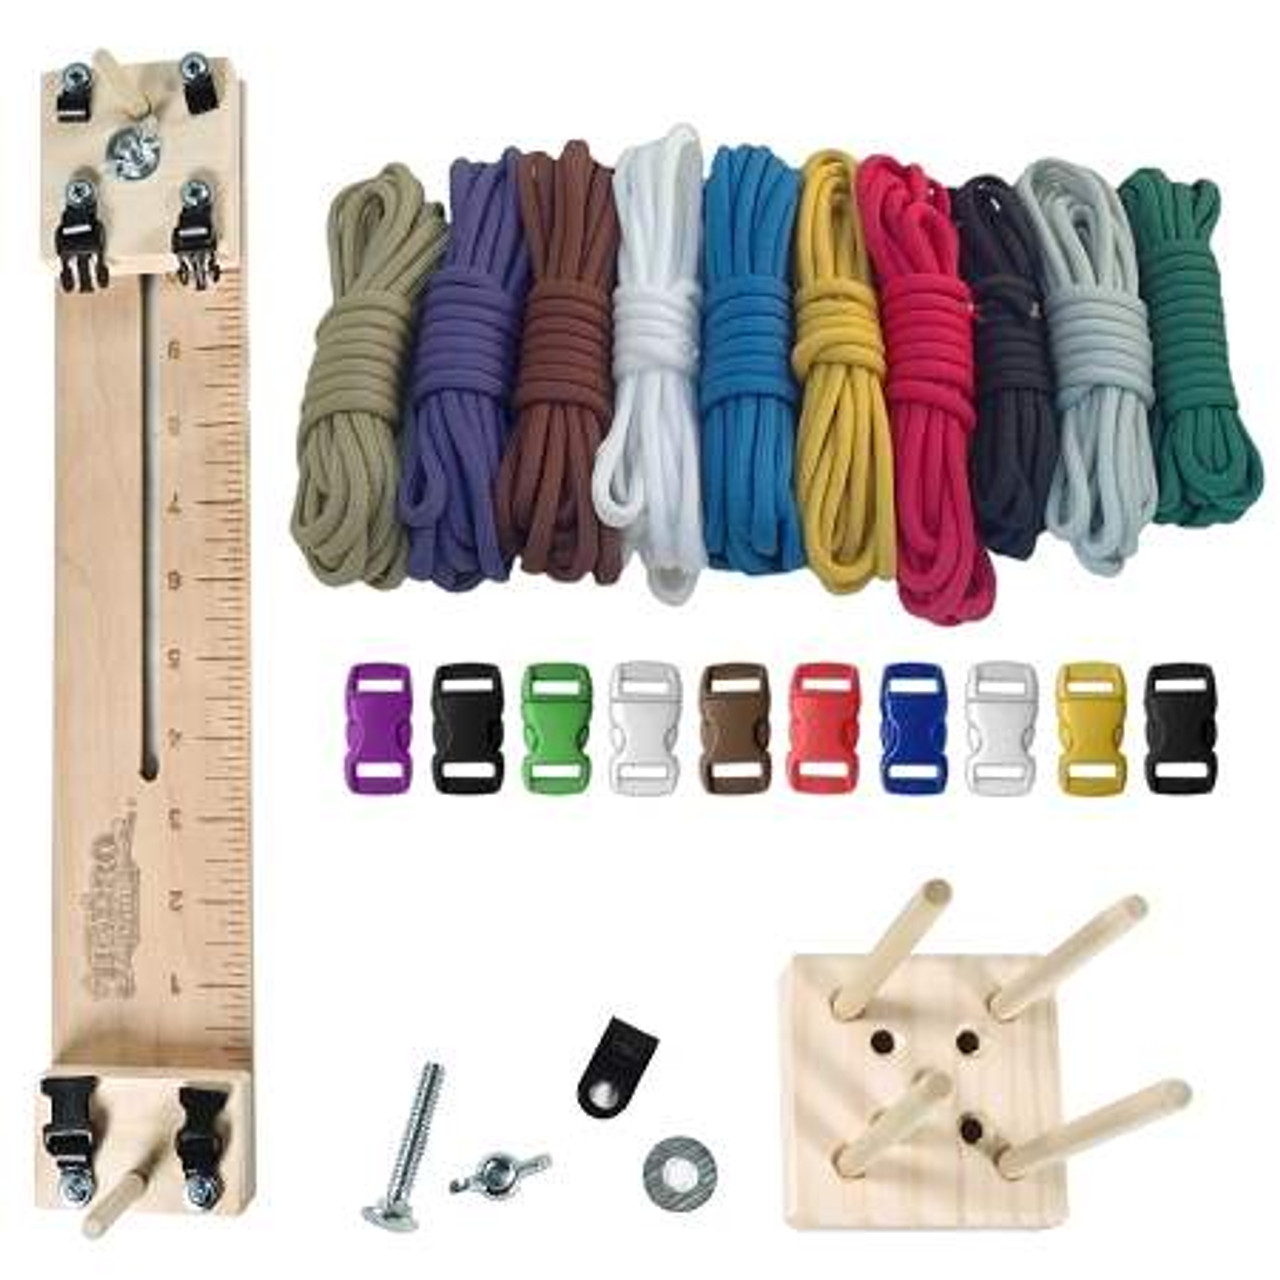 Paracord Combo Crafting Kit with a 10 Pocket Pro Jig -Primary